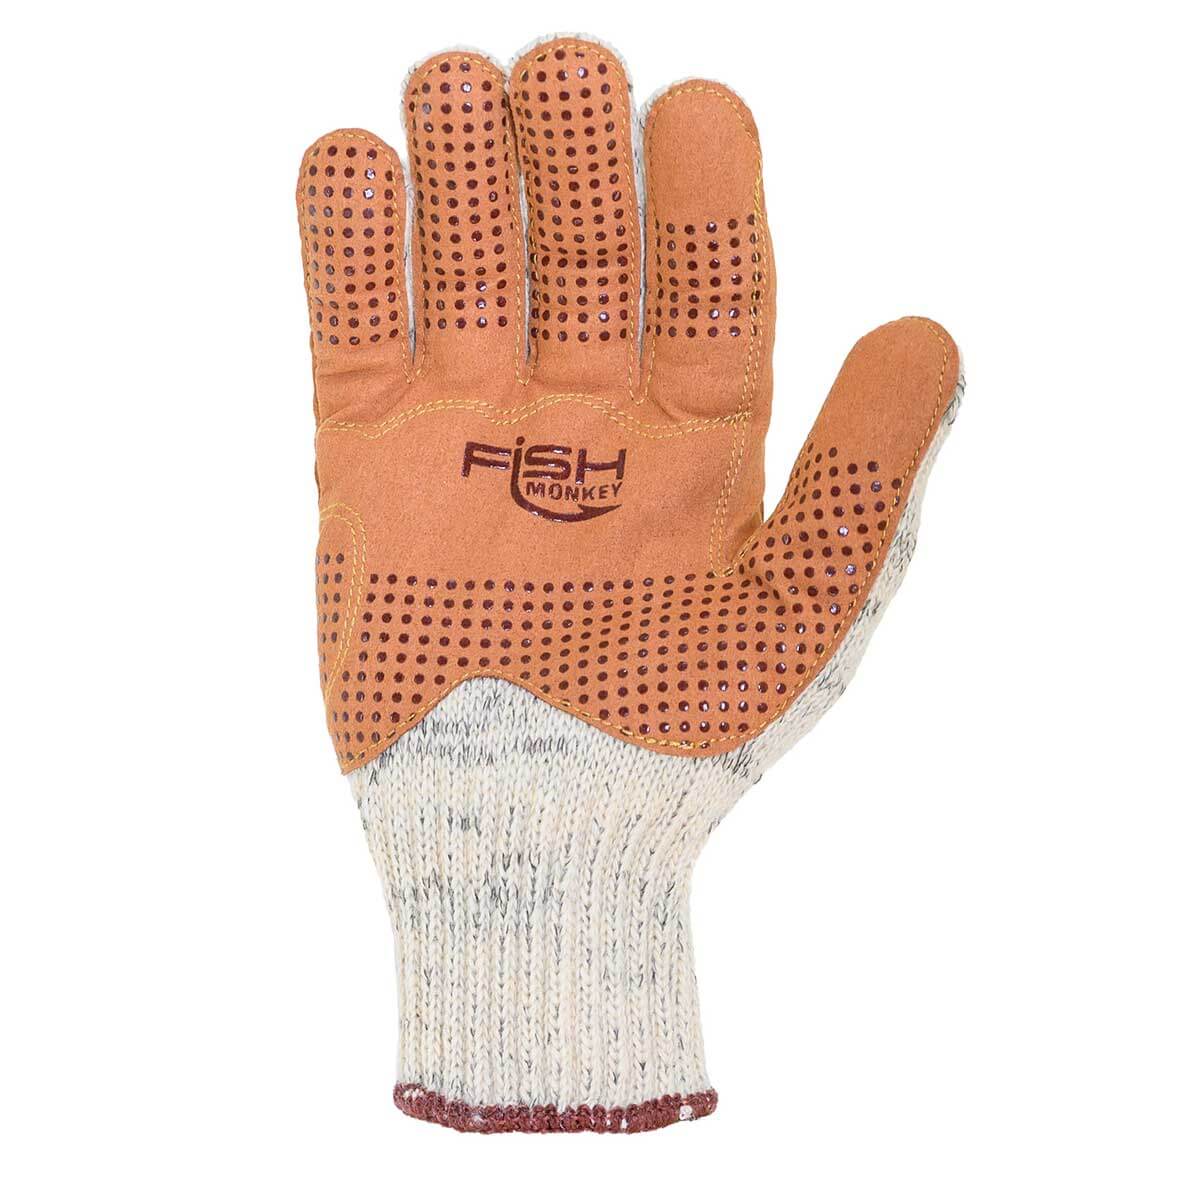 Fish Monkey Wooly Long Gloves Fishing Gloves